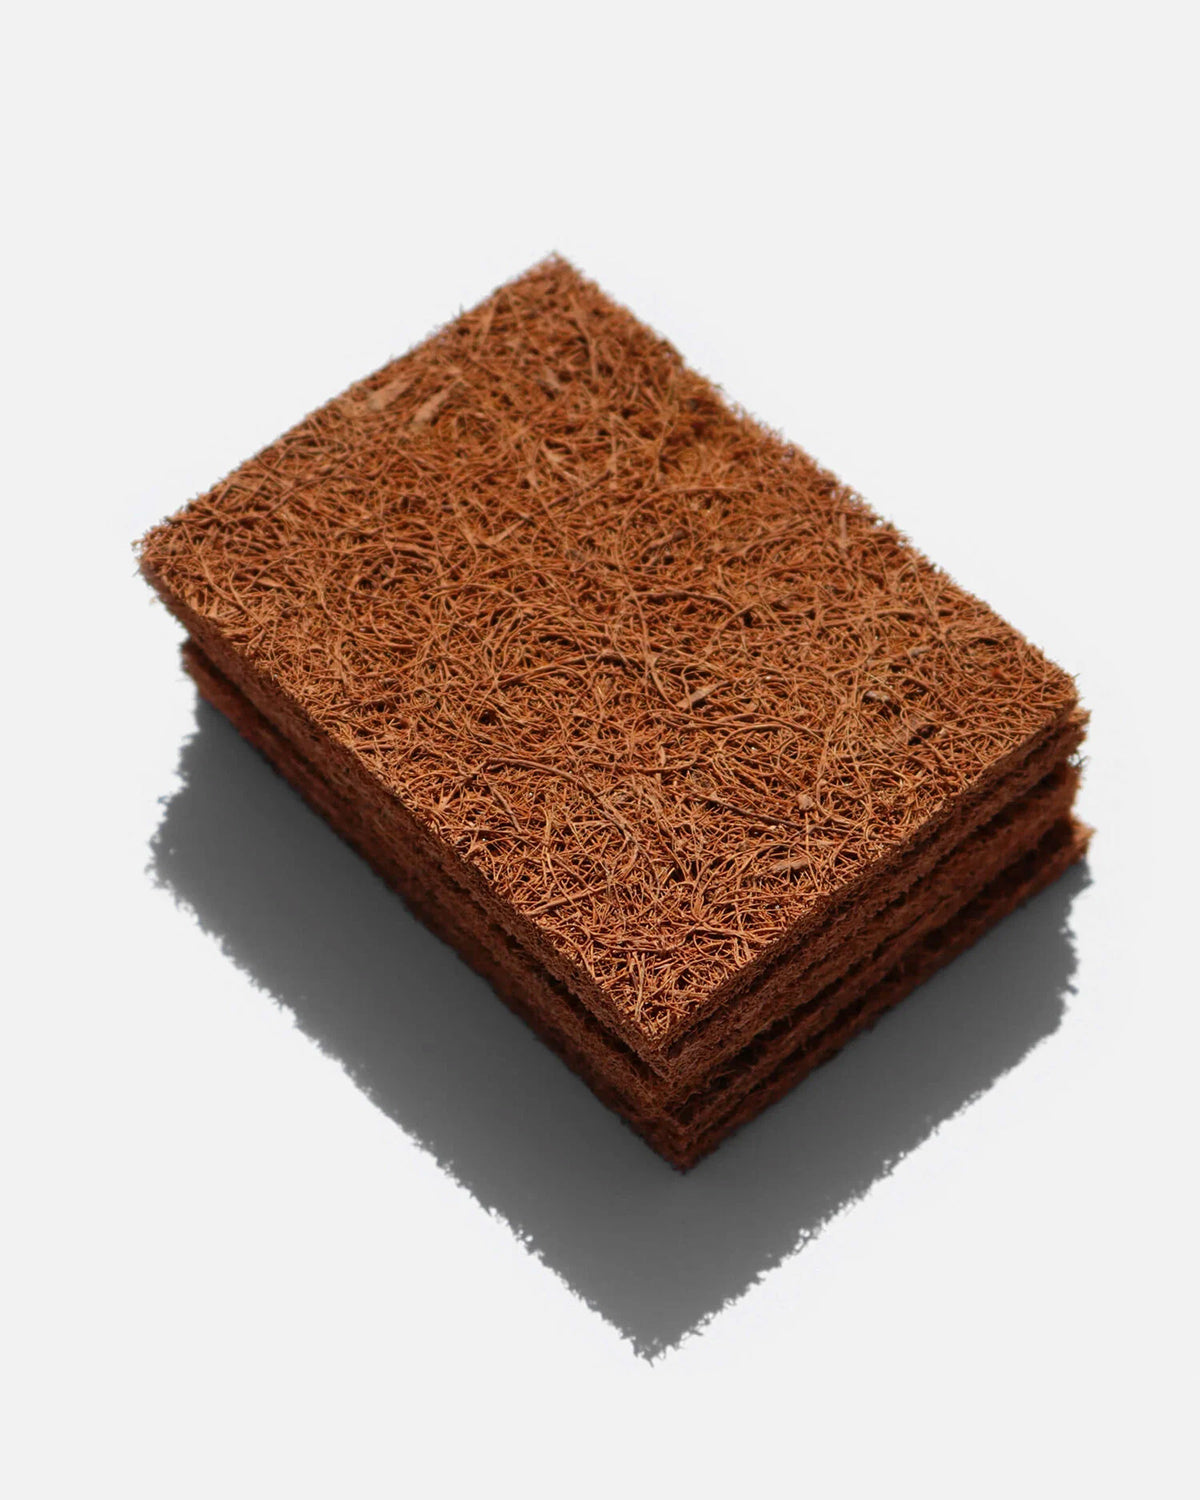 Biodegradable Coconut Scourers - Pack of 5